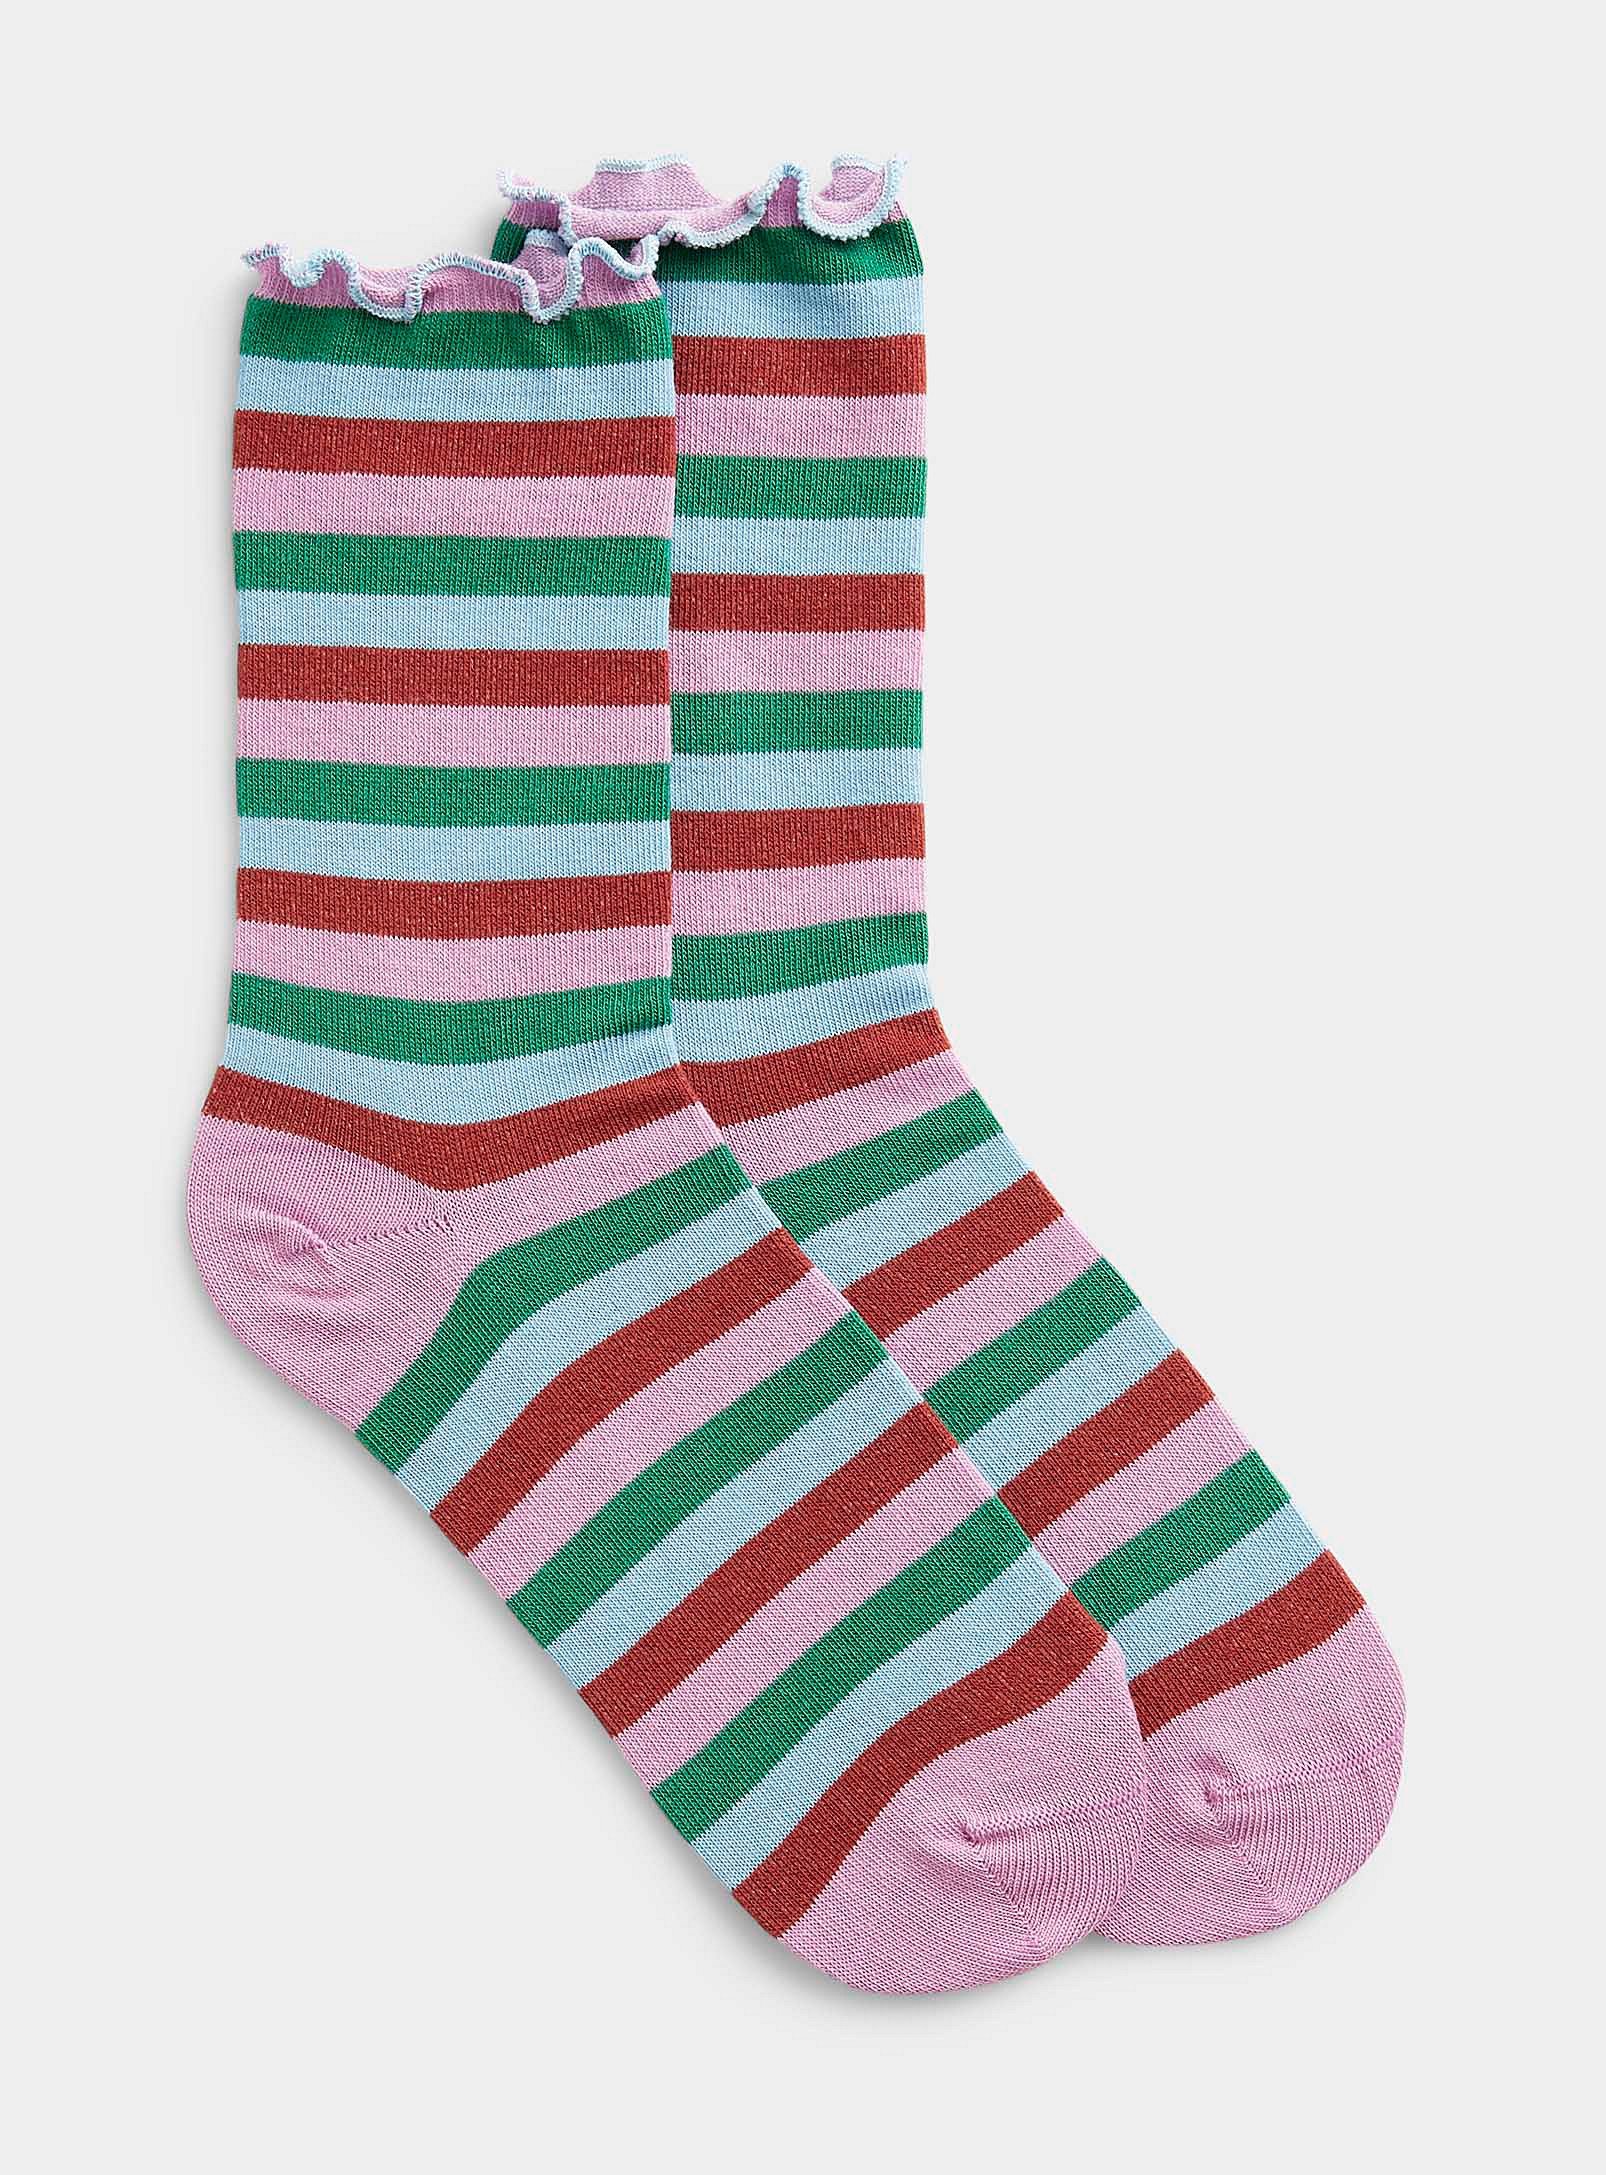 Paul Smith - Women's Stripes and frills sock